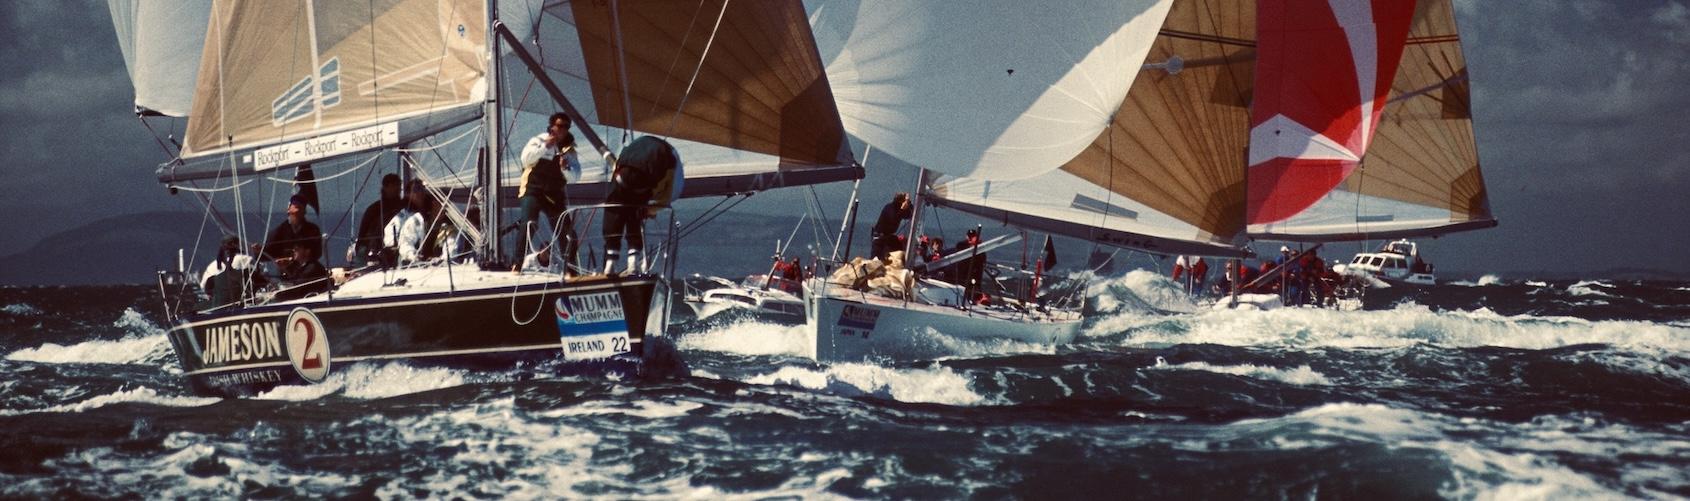 Ireland has a rich history competing in the Admiral's Cup. Although an Irish team have never won the glittering golden trophy, they came very close in 1979. Leading the regatta going into the tragic Fastnet Race, two of the Irish teams broke their rudders ending their challenge for victory.  © Rick Tomlinson